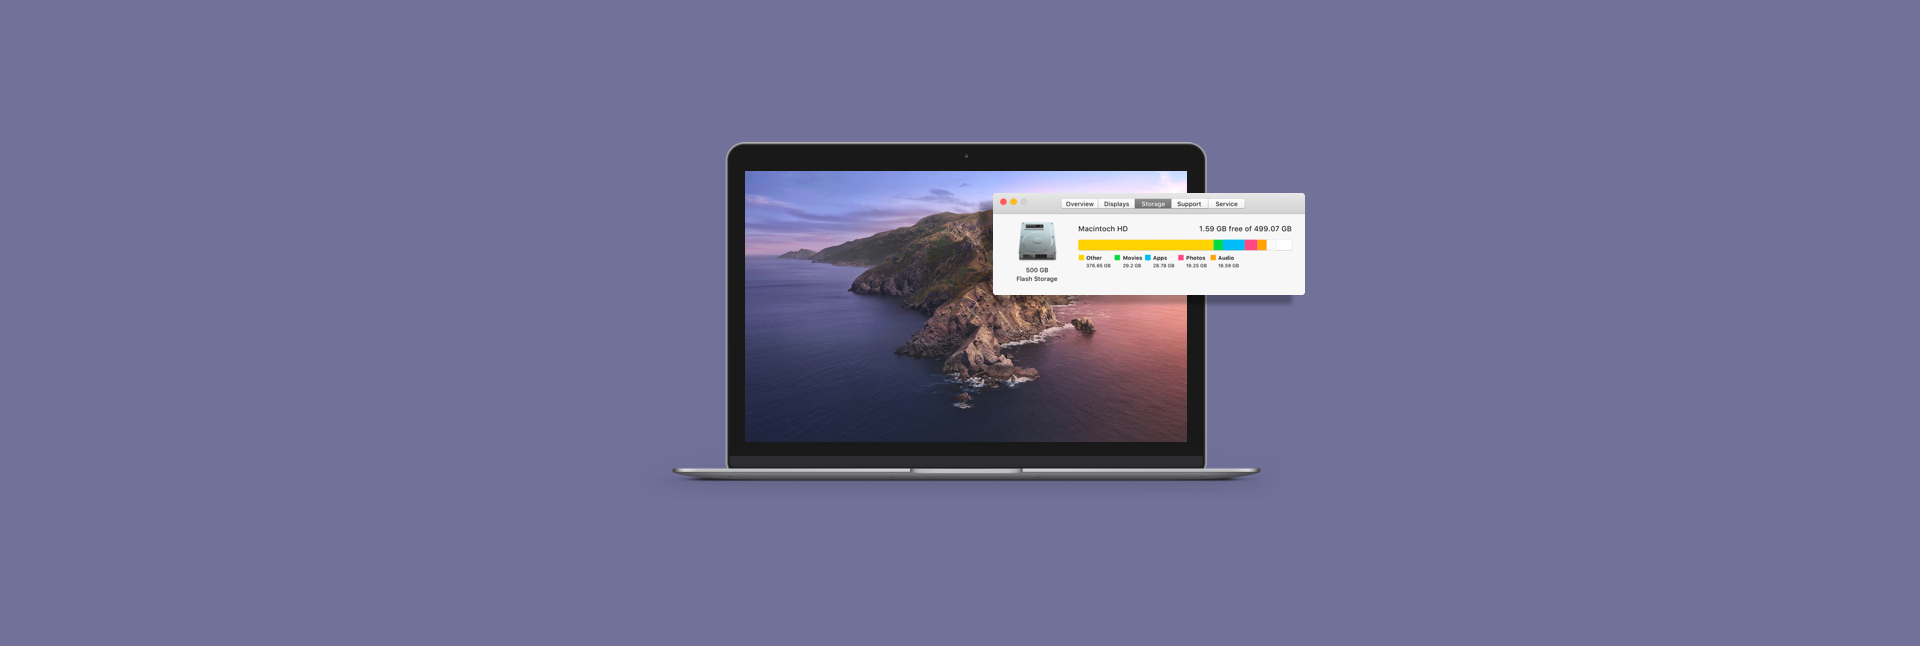 how to clear room on startup disk mac